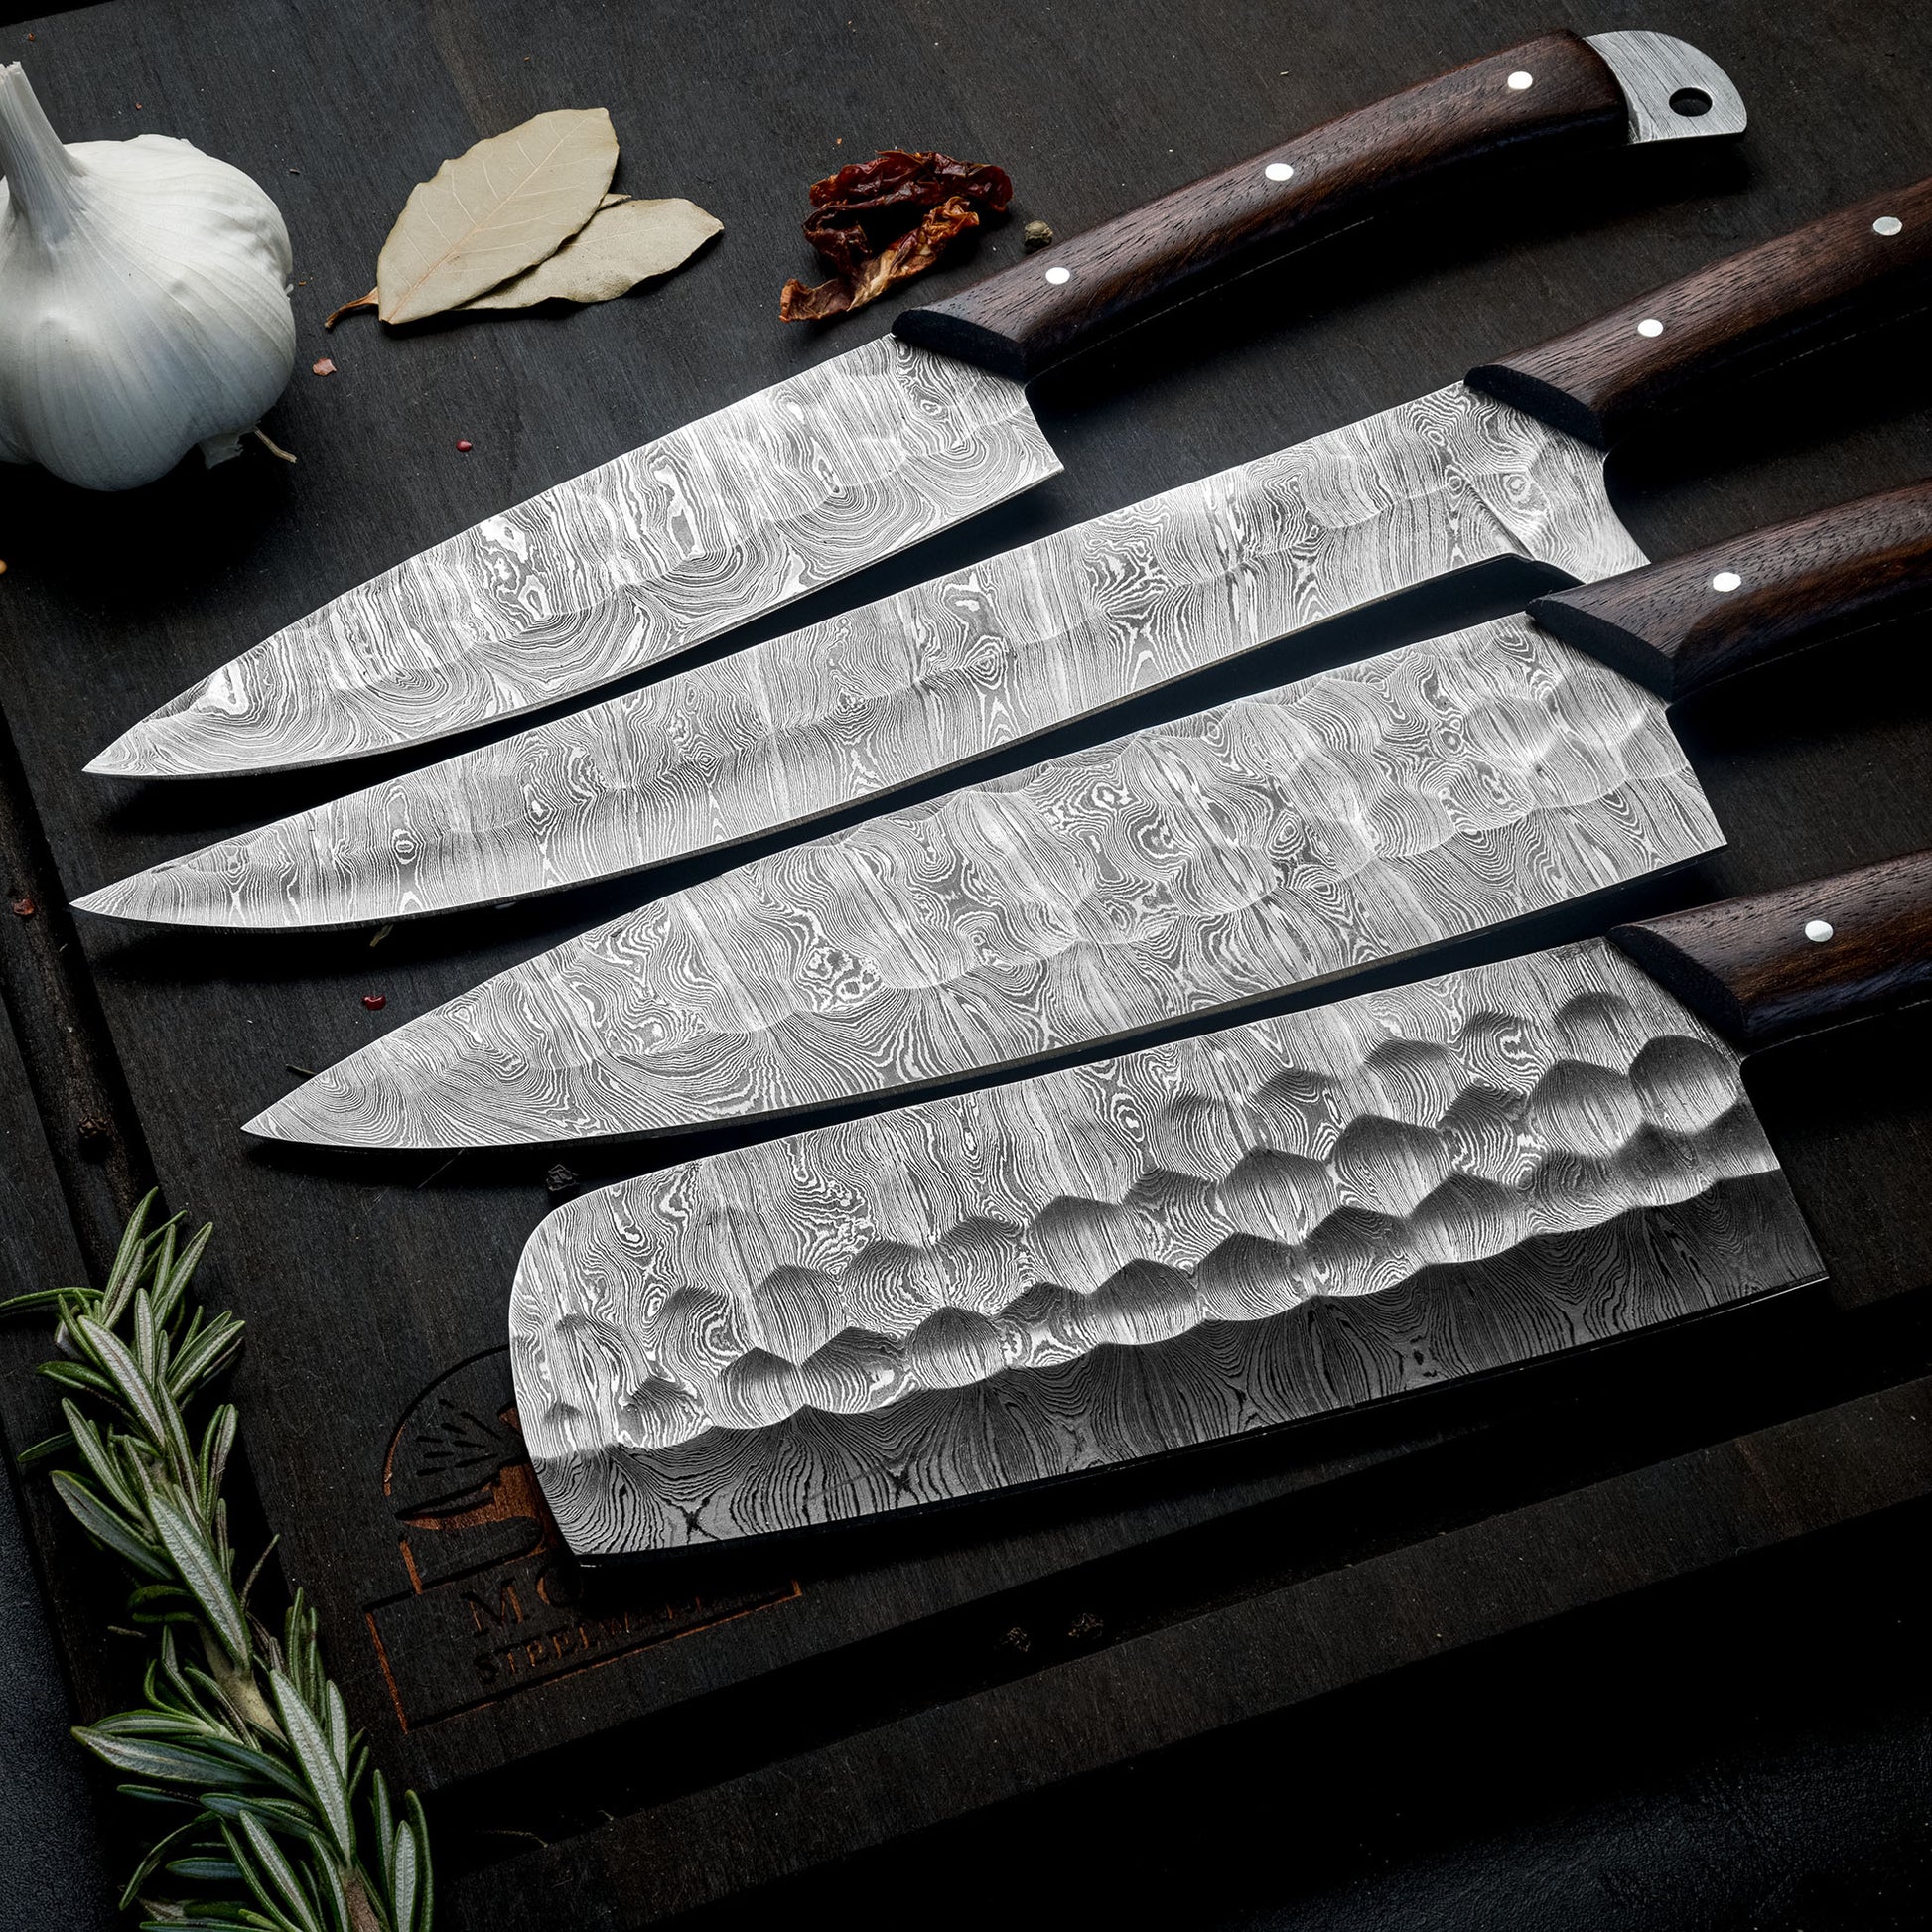 Damascus Steel Chef Knives Set  Kitchen Knife - Camping Cutting Knives